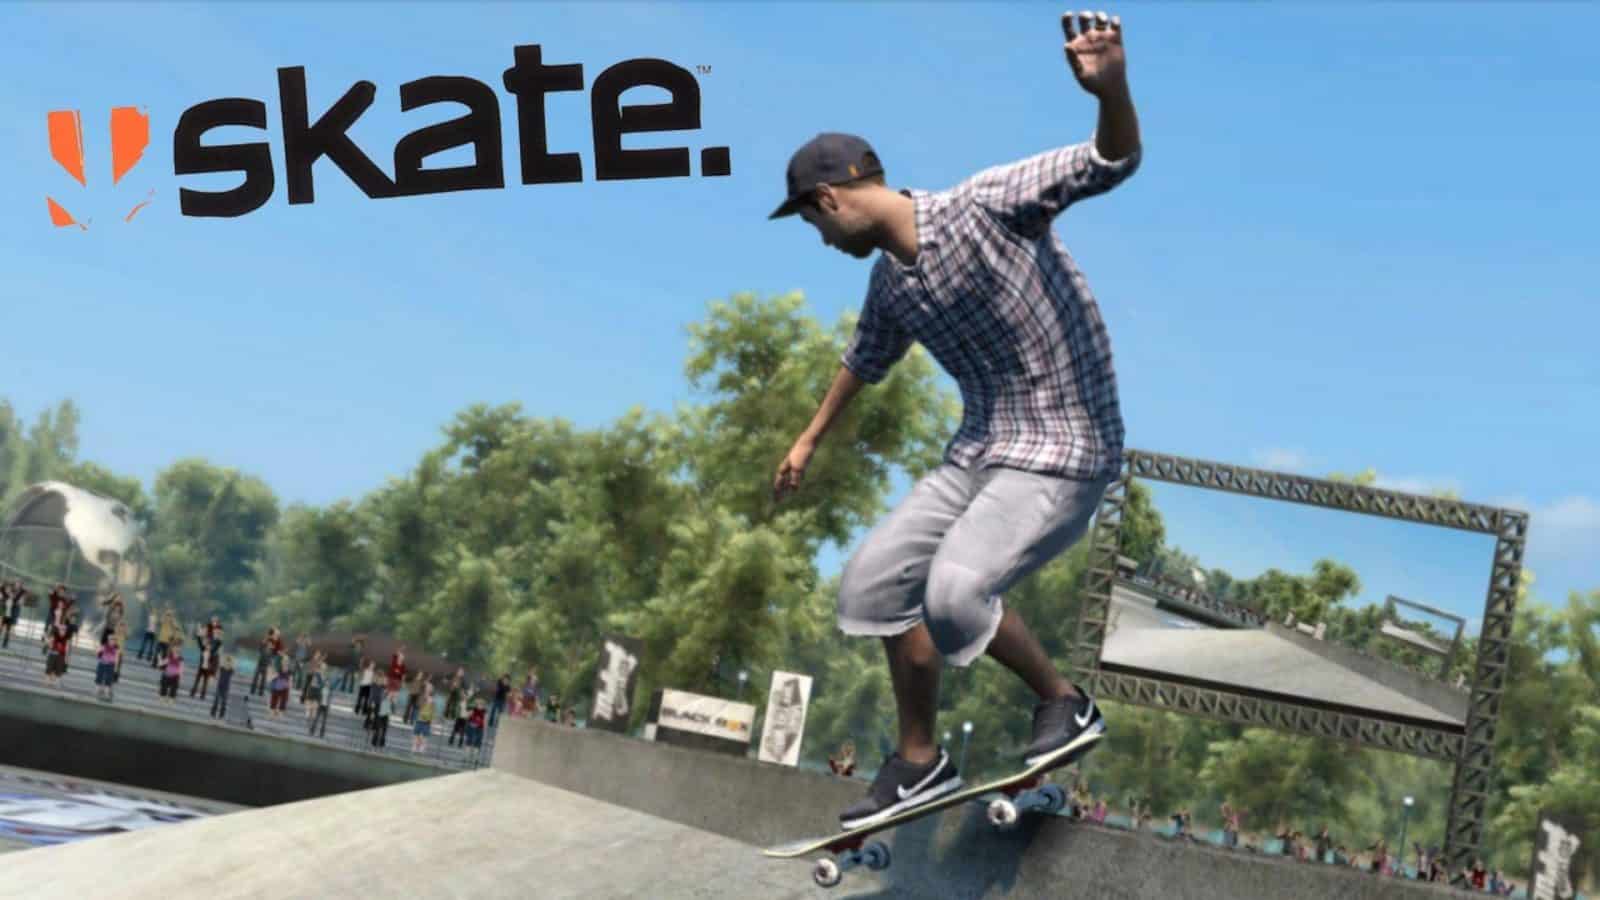 player doing an ollie in skate